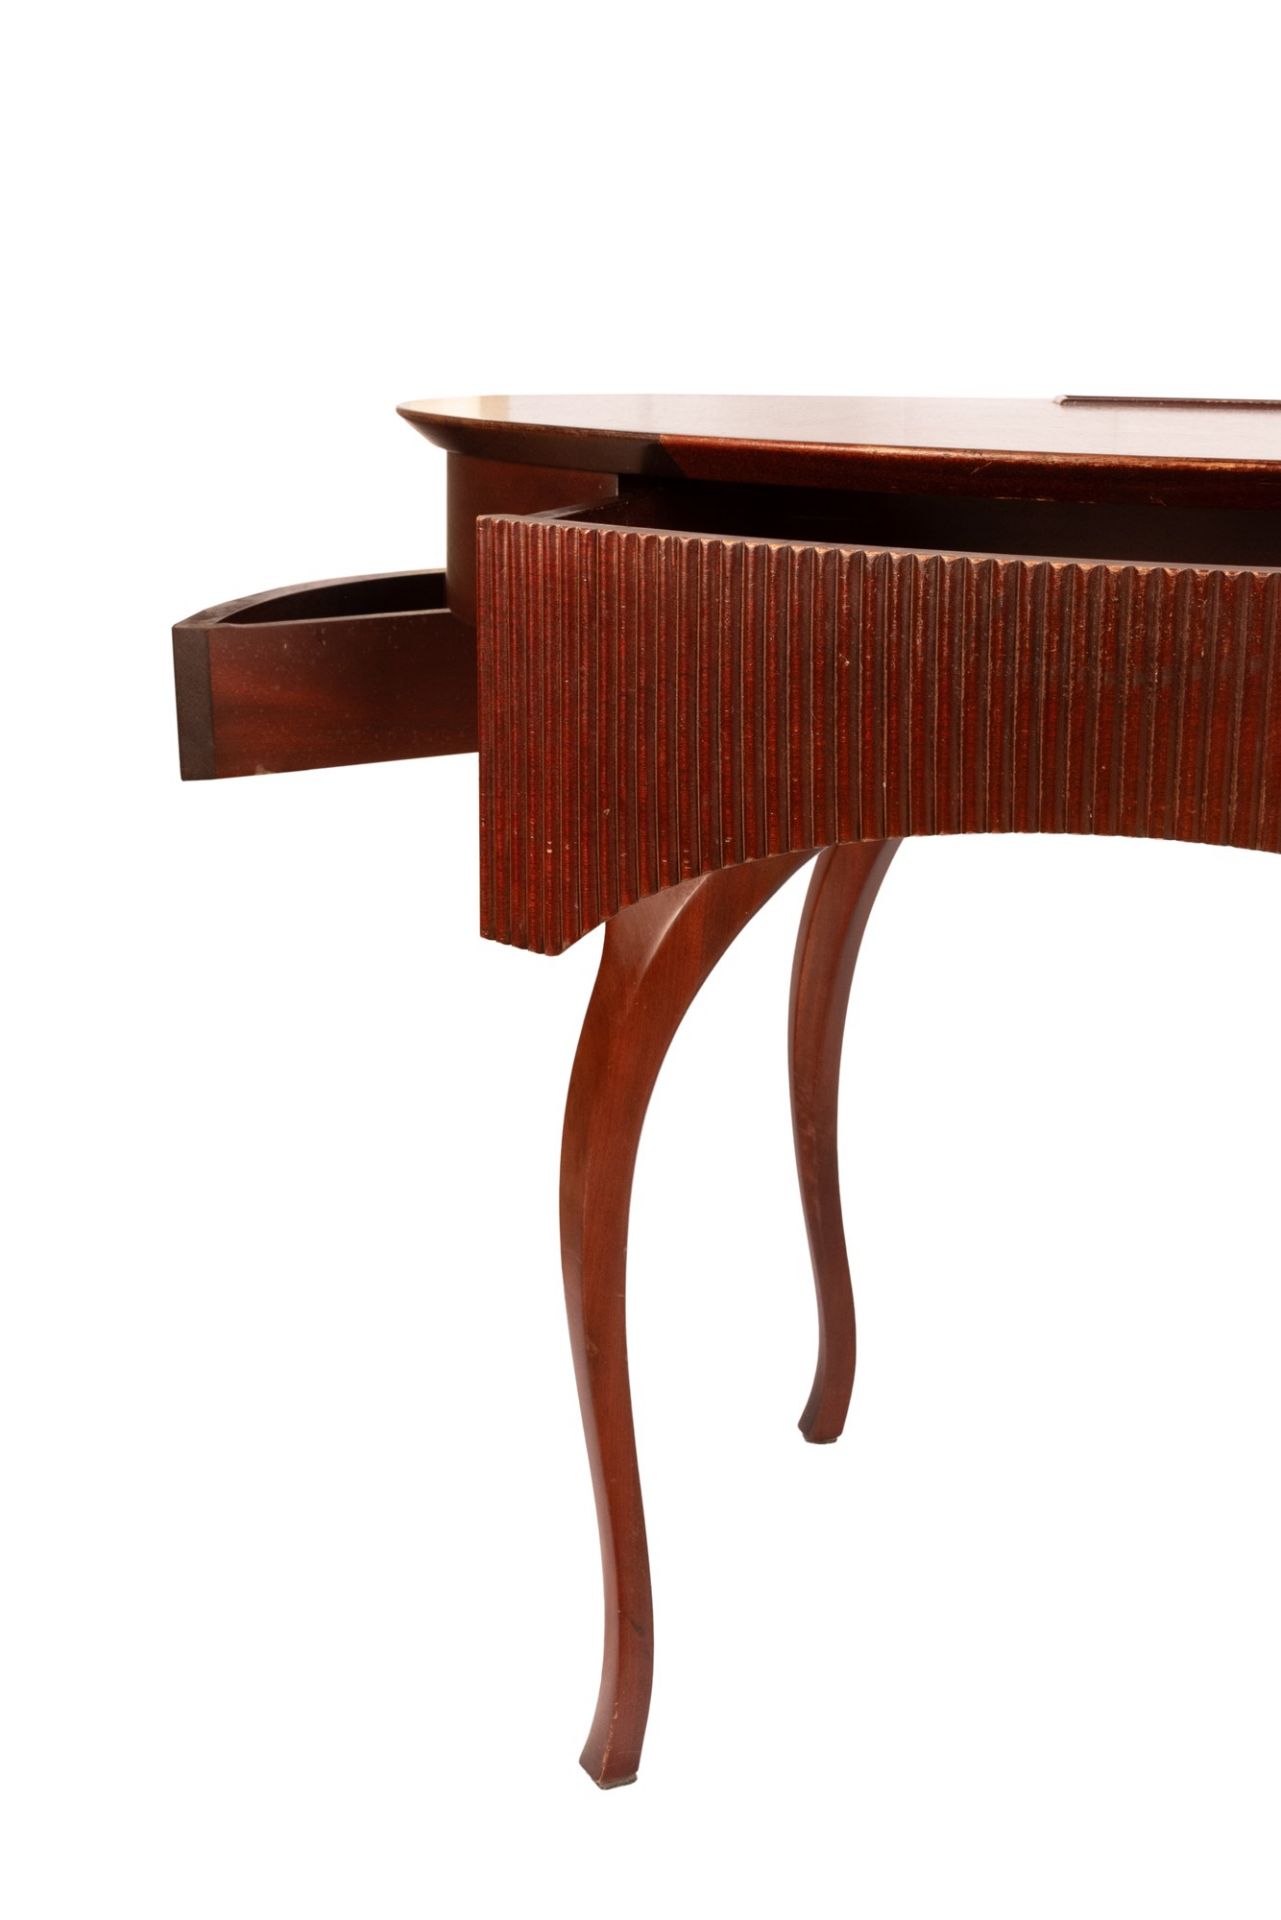 Writing desk in cherry wood - Image 14 of 25